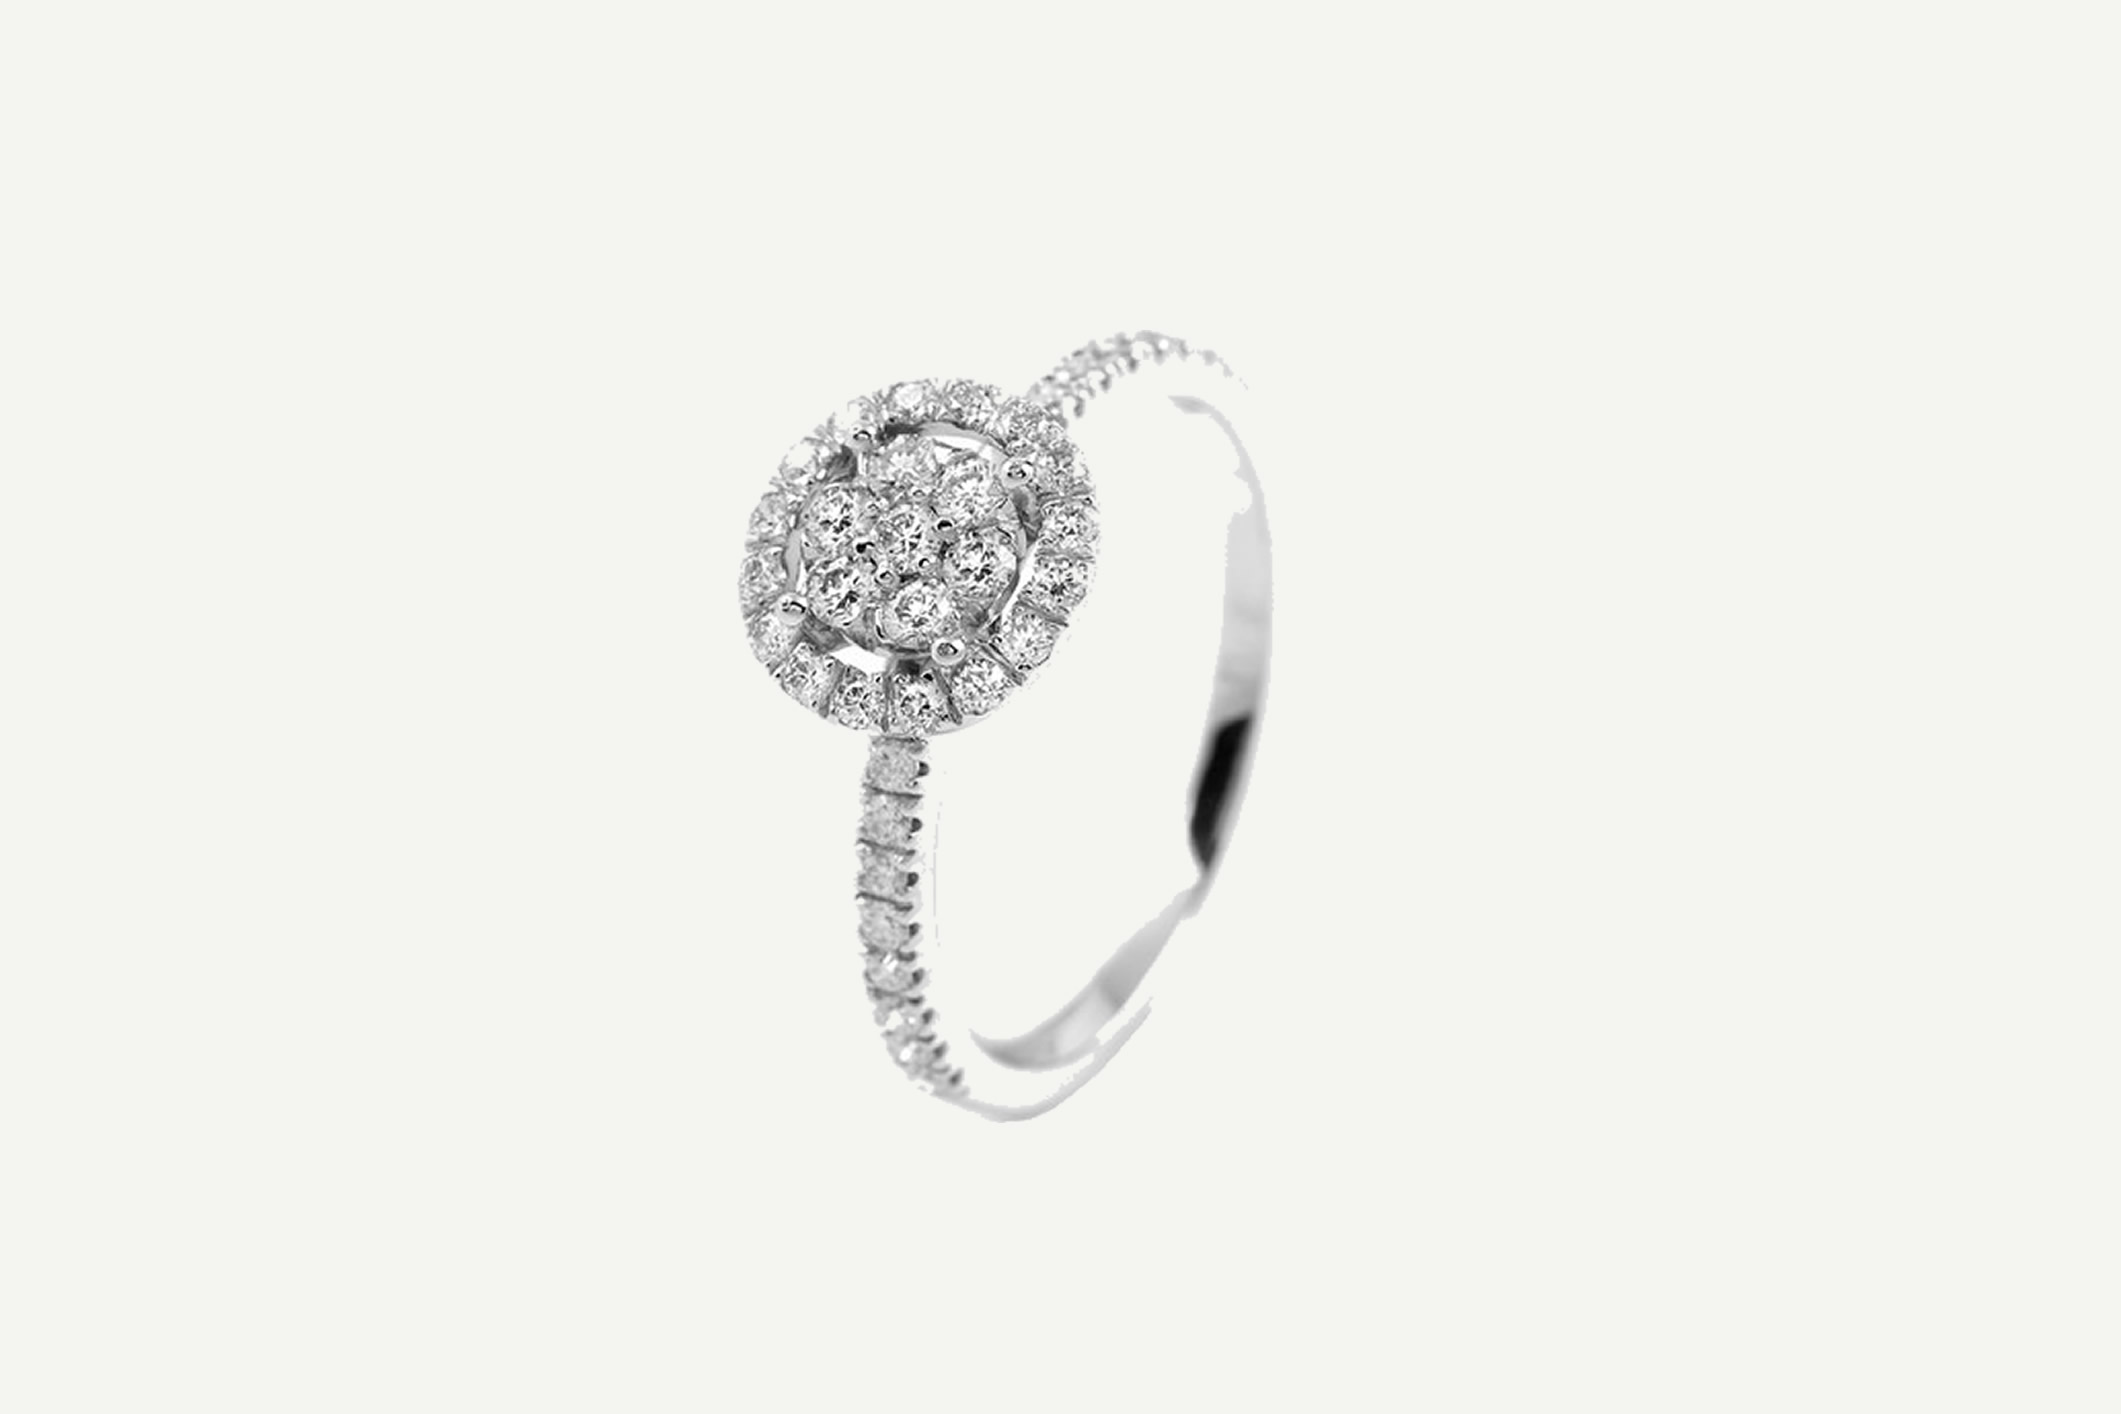 Ring in white gold and diamonds from the Setenta y Nueve collection